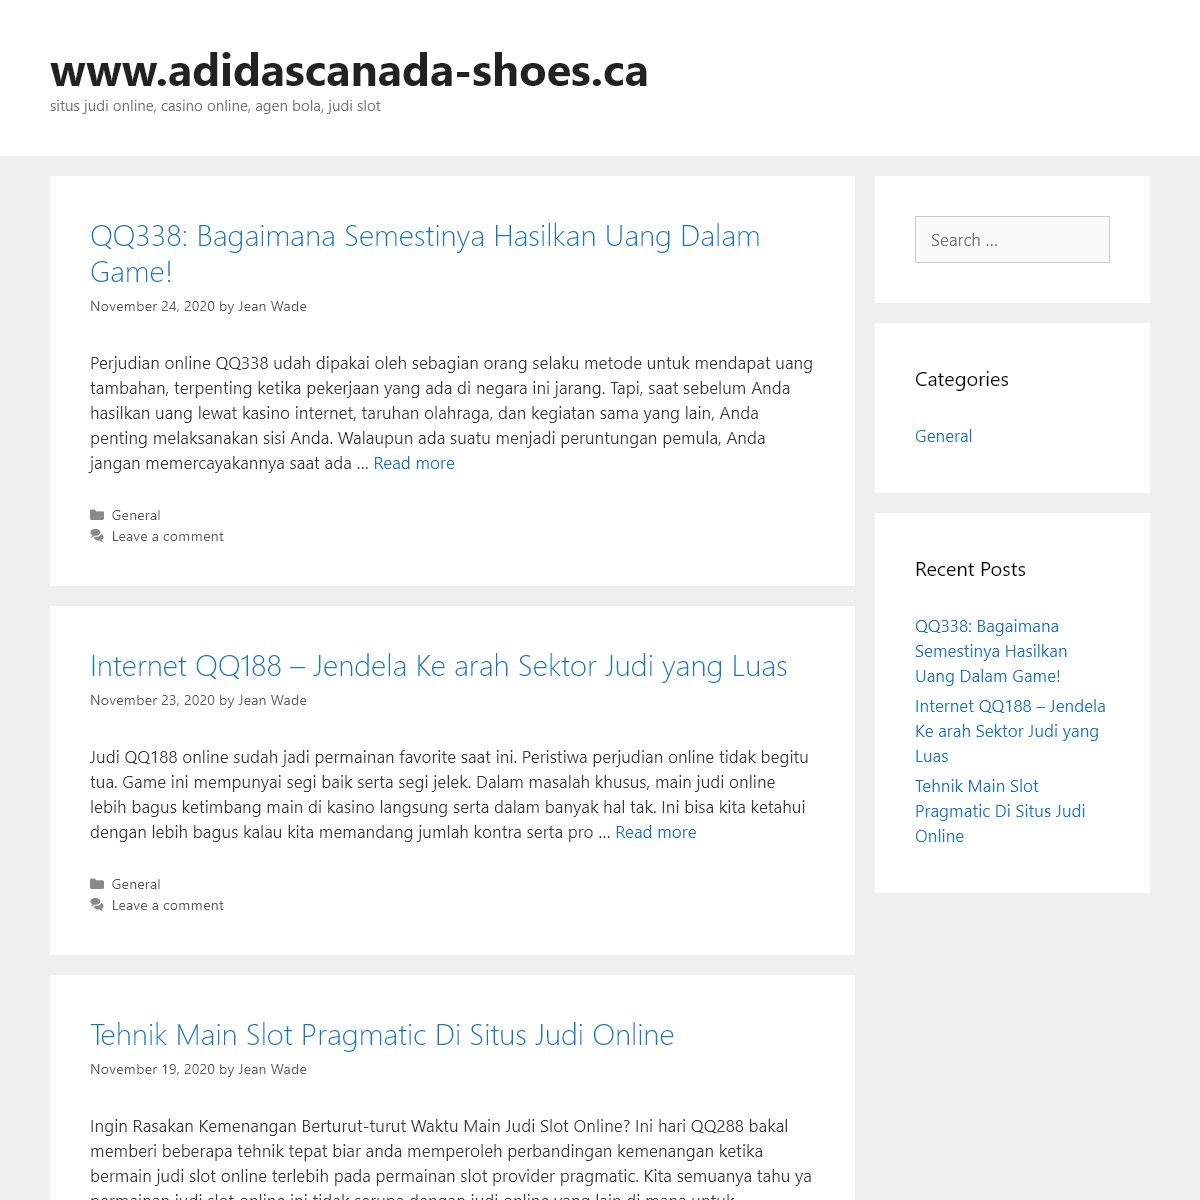 A complete backup of adidascanada-shoes.ca